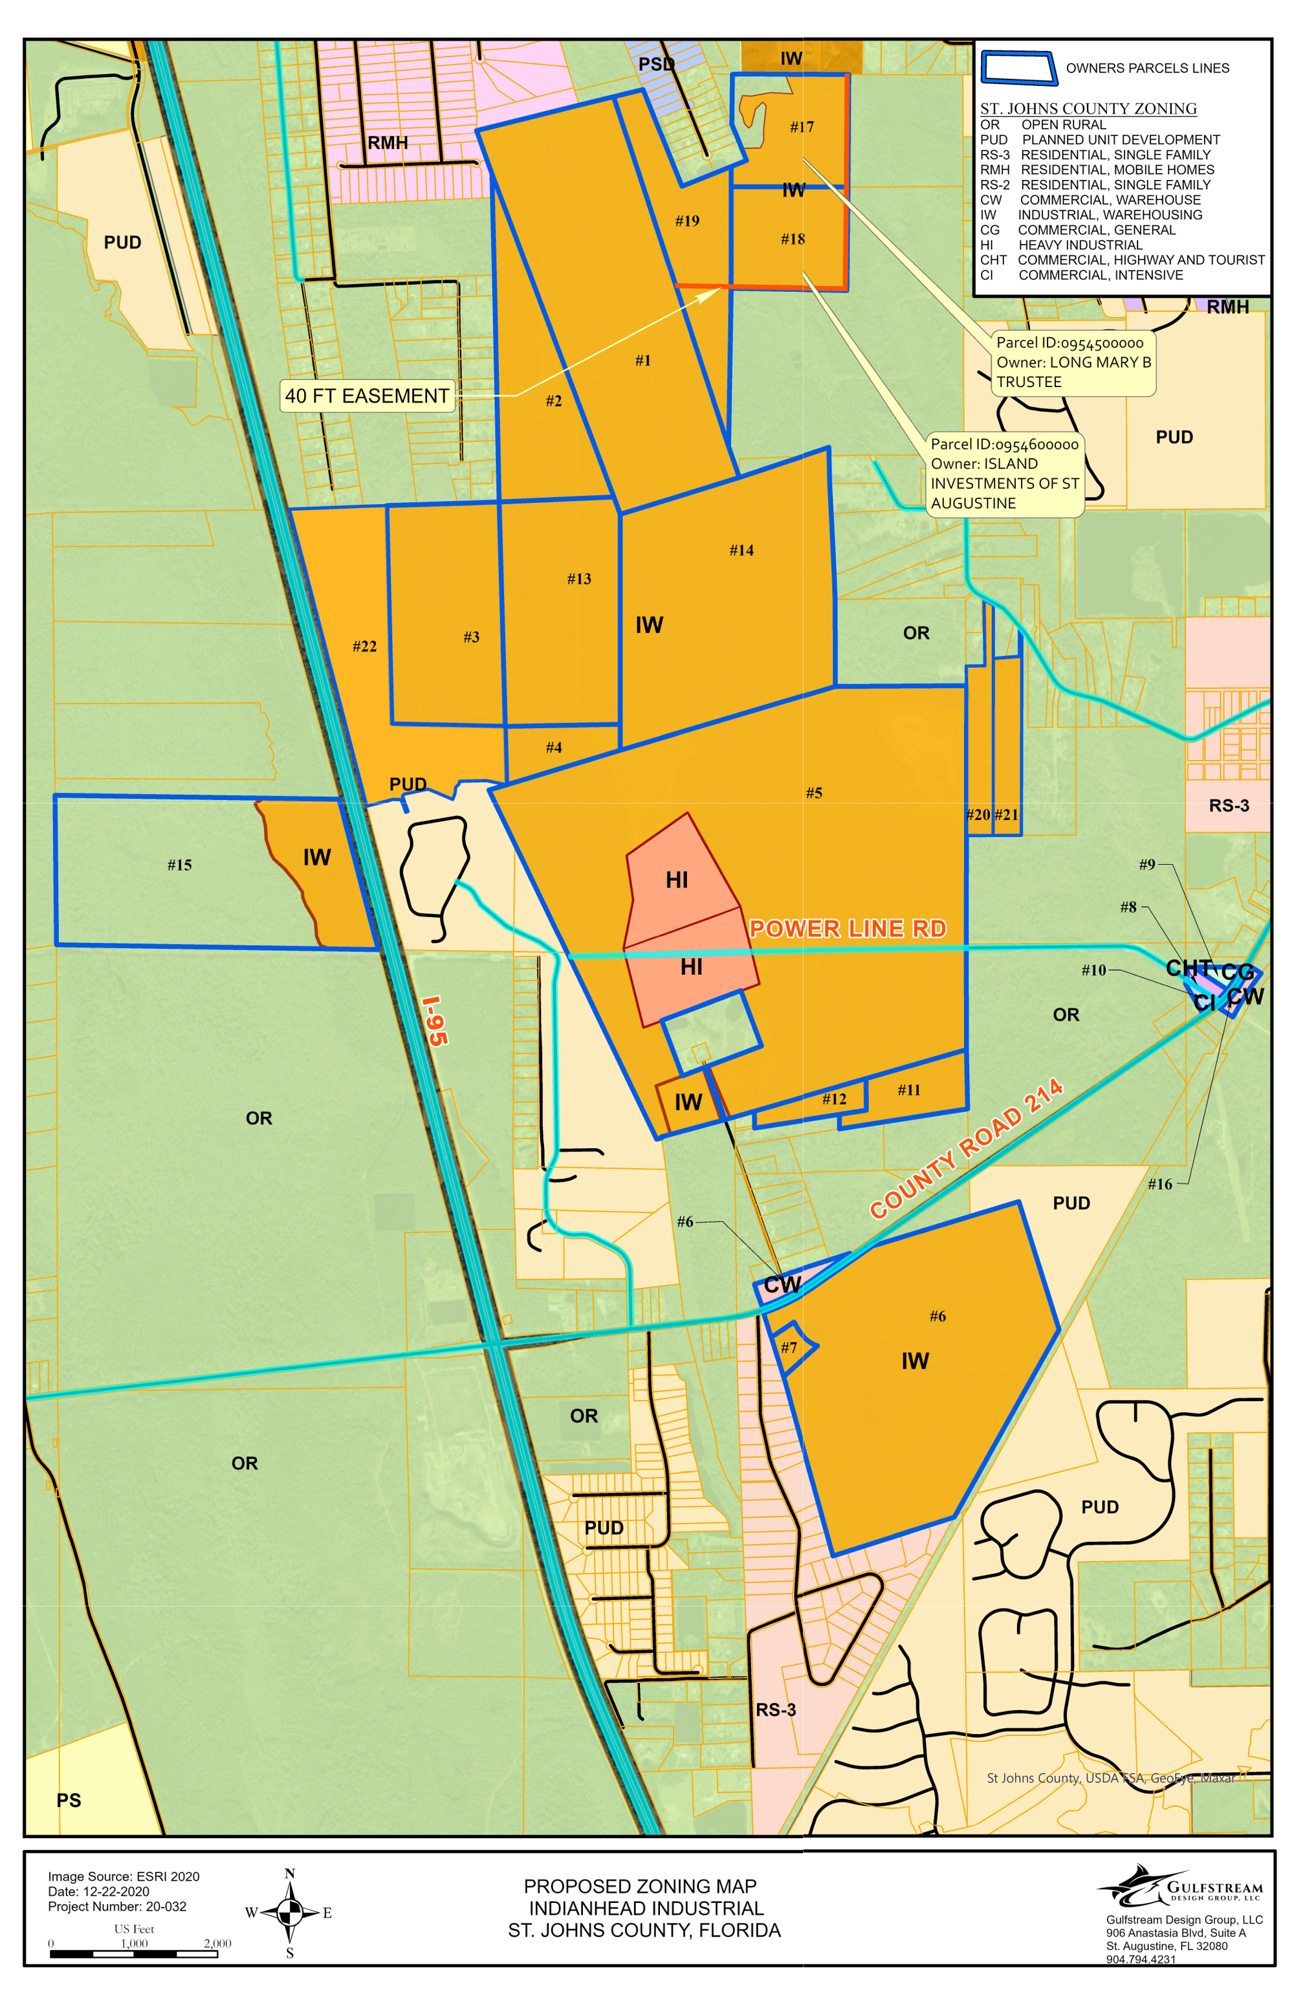 The proposed zoning map for the 1,744-acre property.